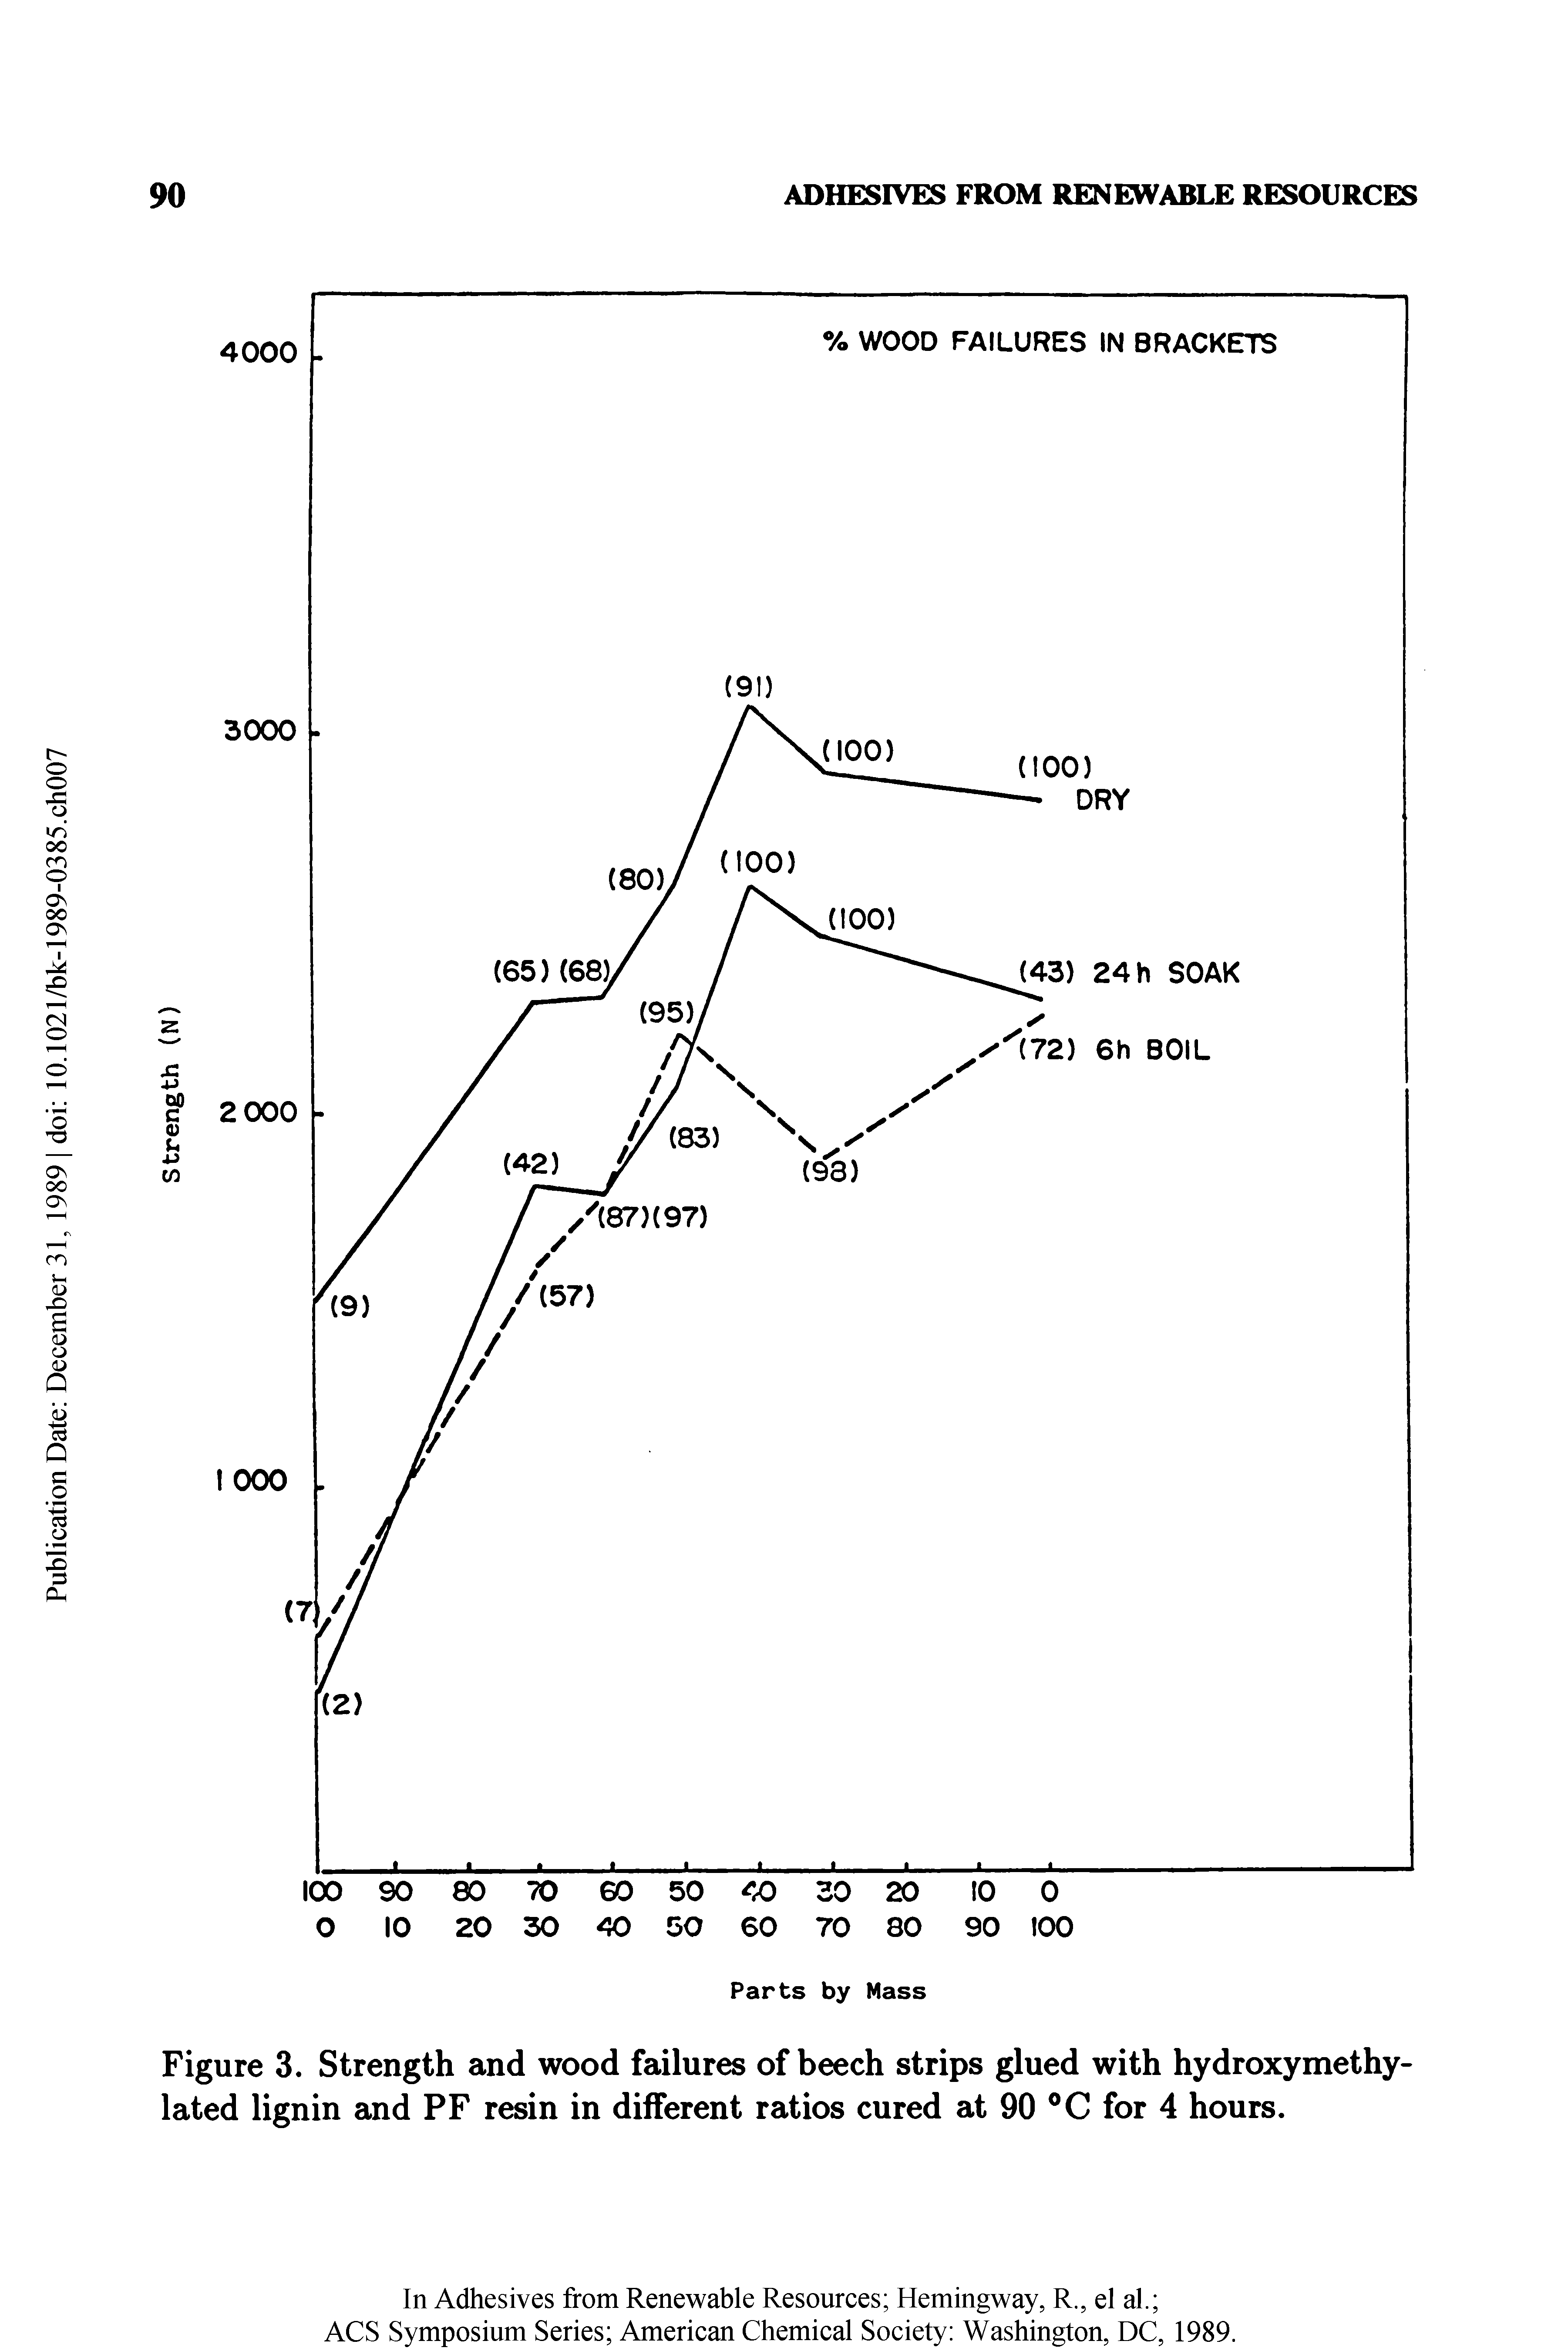 Figure 3. Strength and wood failures of beech strips glued with hydroxymethy-lated lignin and PF resin in different ratios cured at 90 °C for 4 hours.